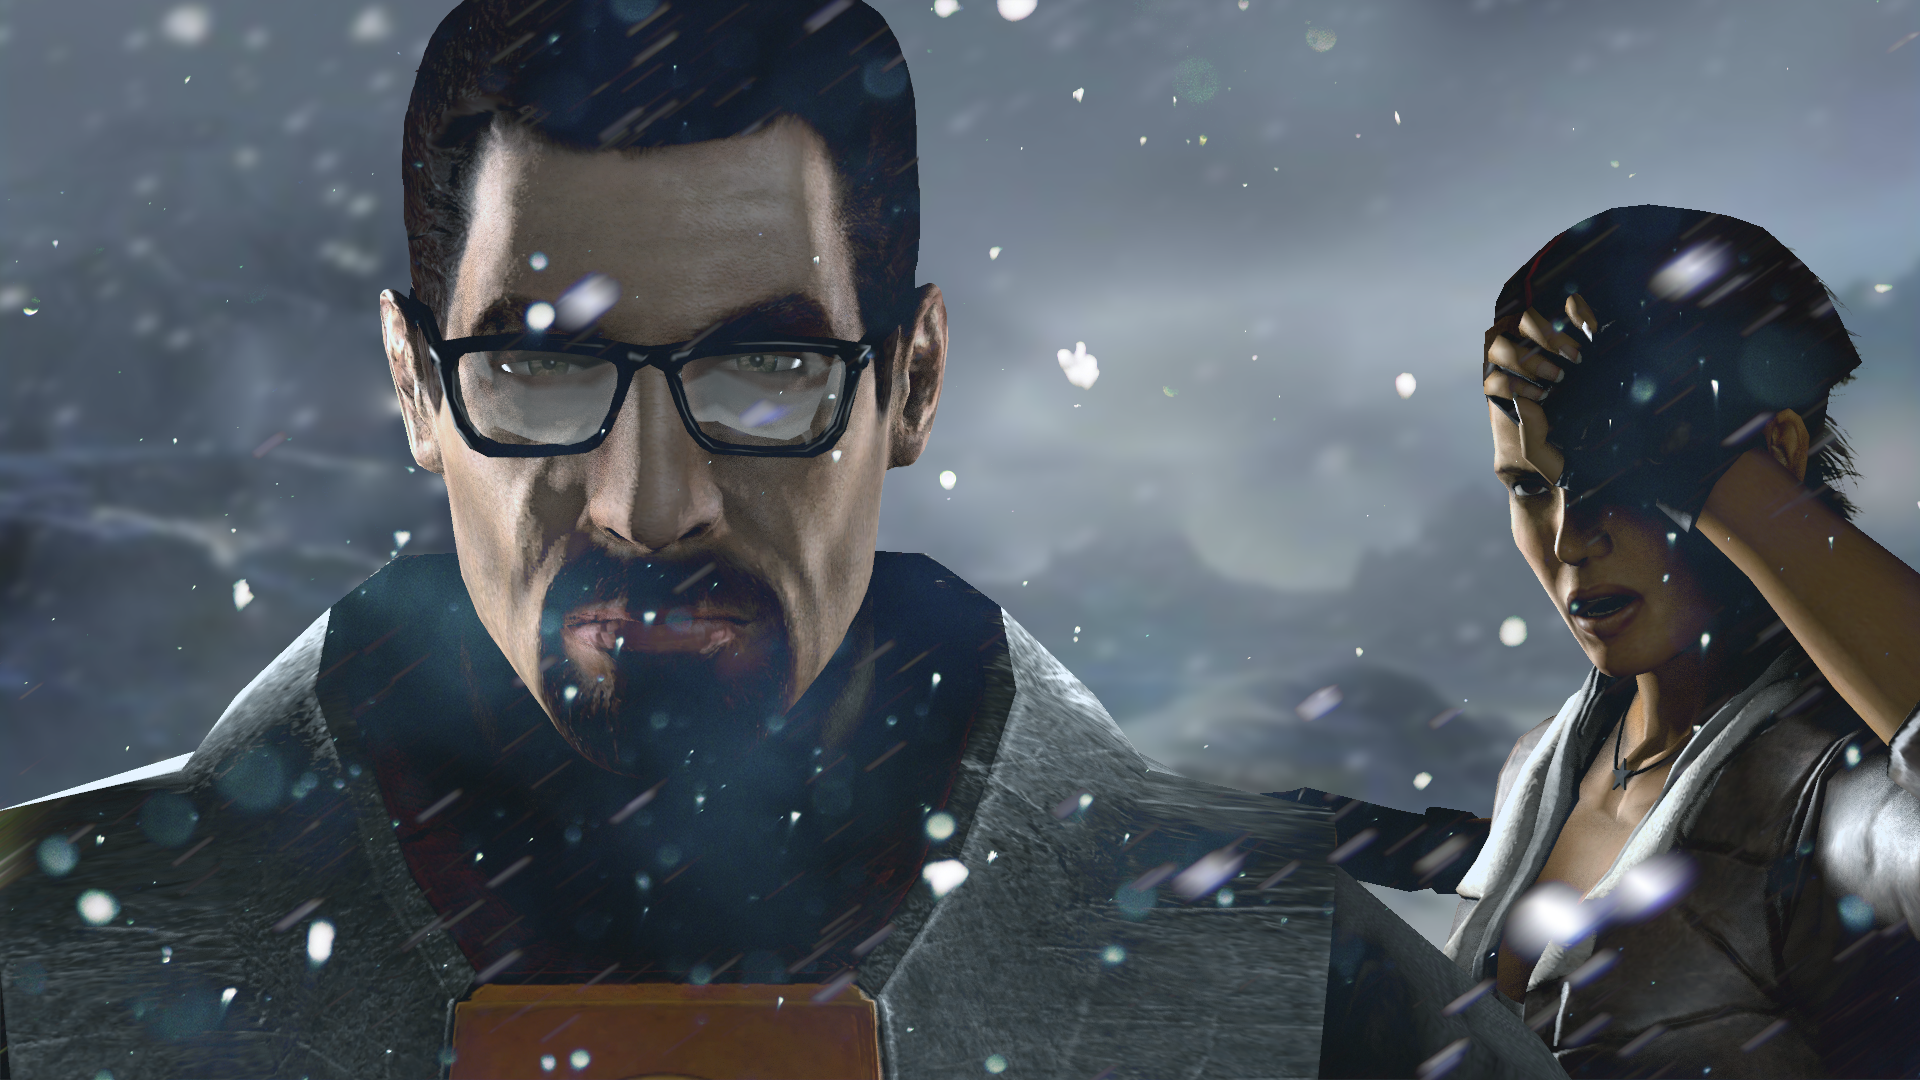 “Half-Life” Lead Writer Has Left Valve - What does this mean for 